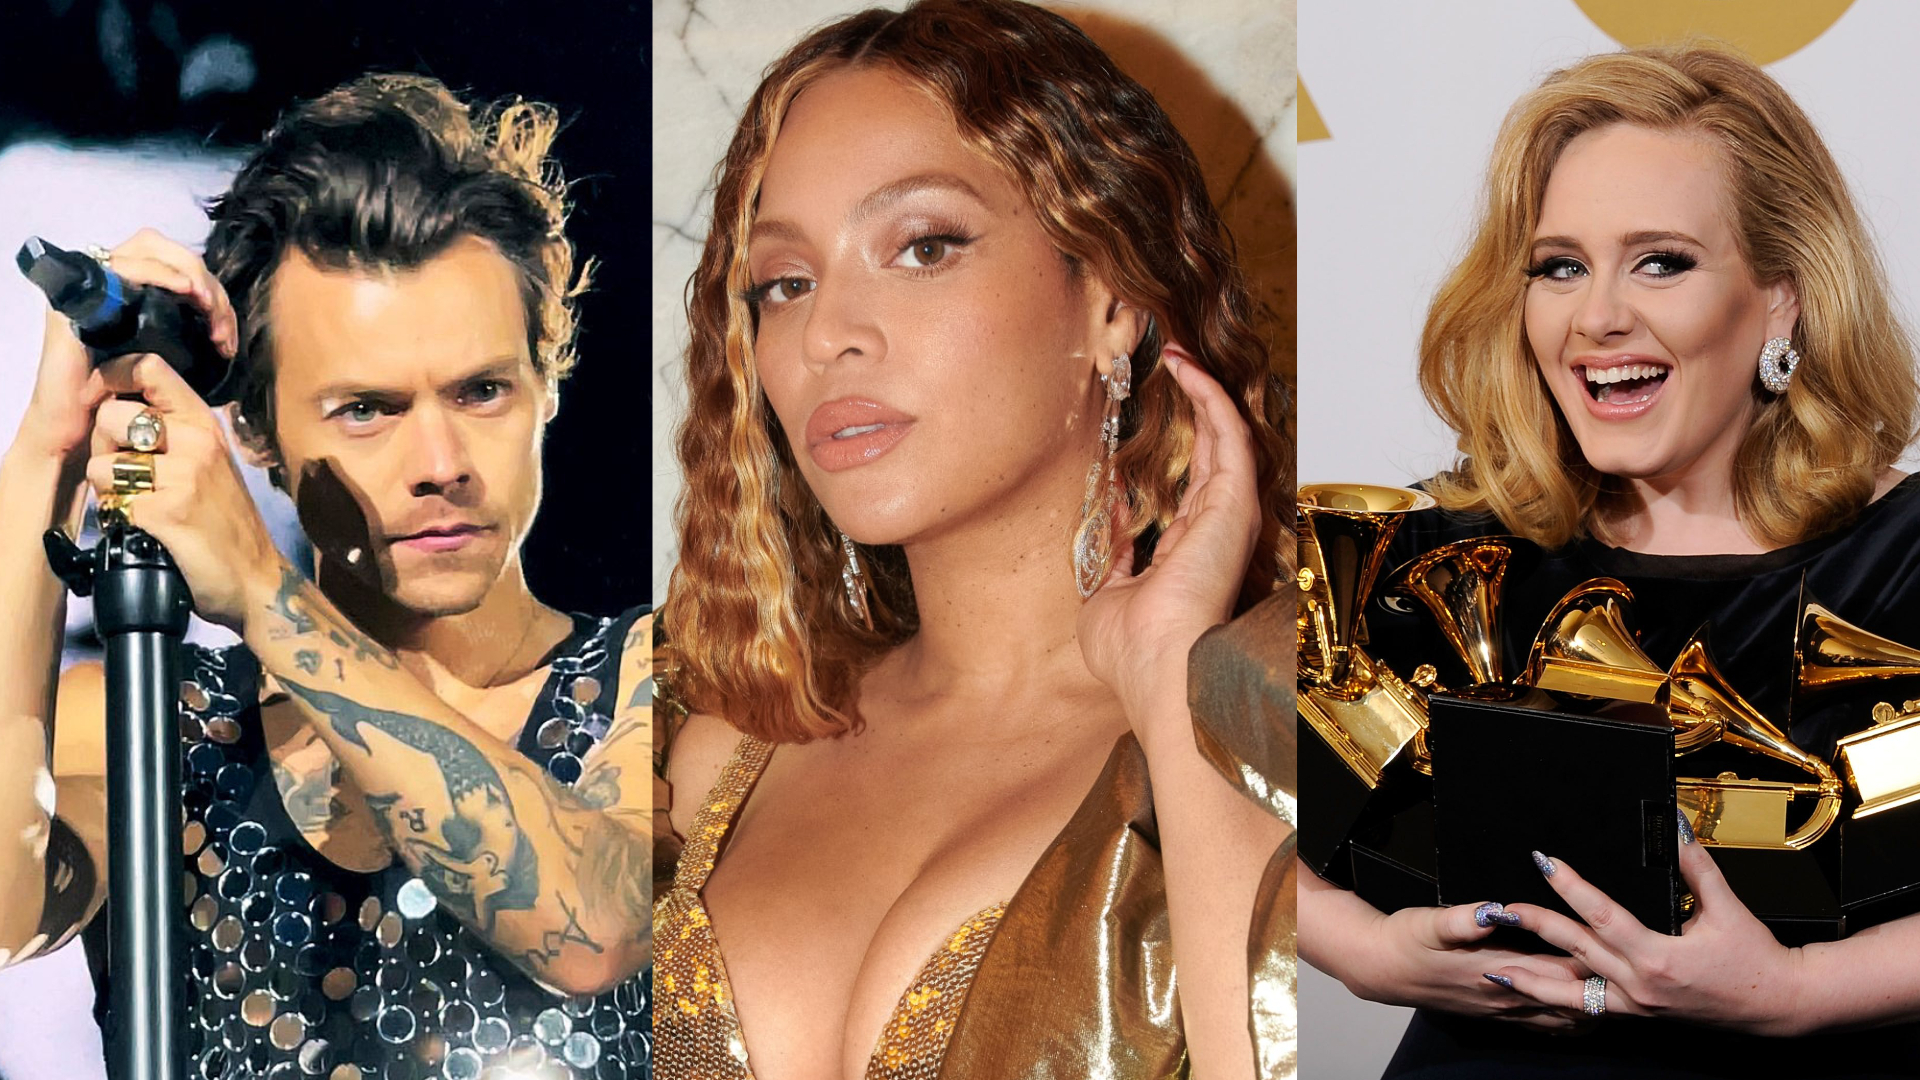 What will the 2023 GRAMMYs Song of the Year be?